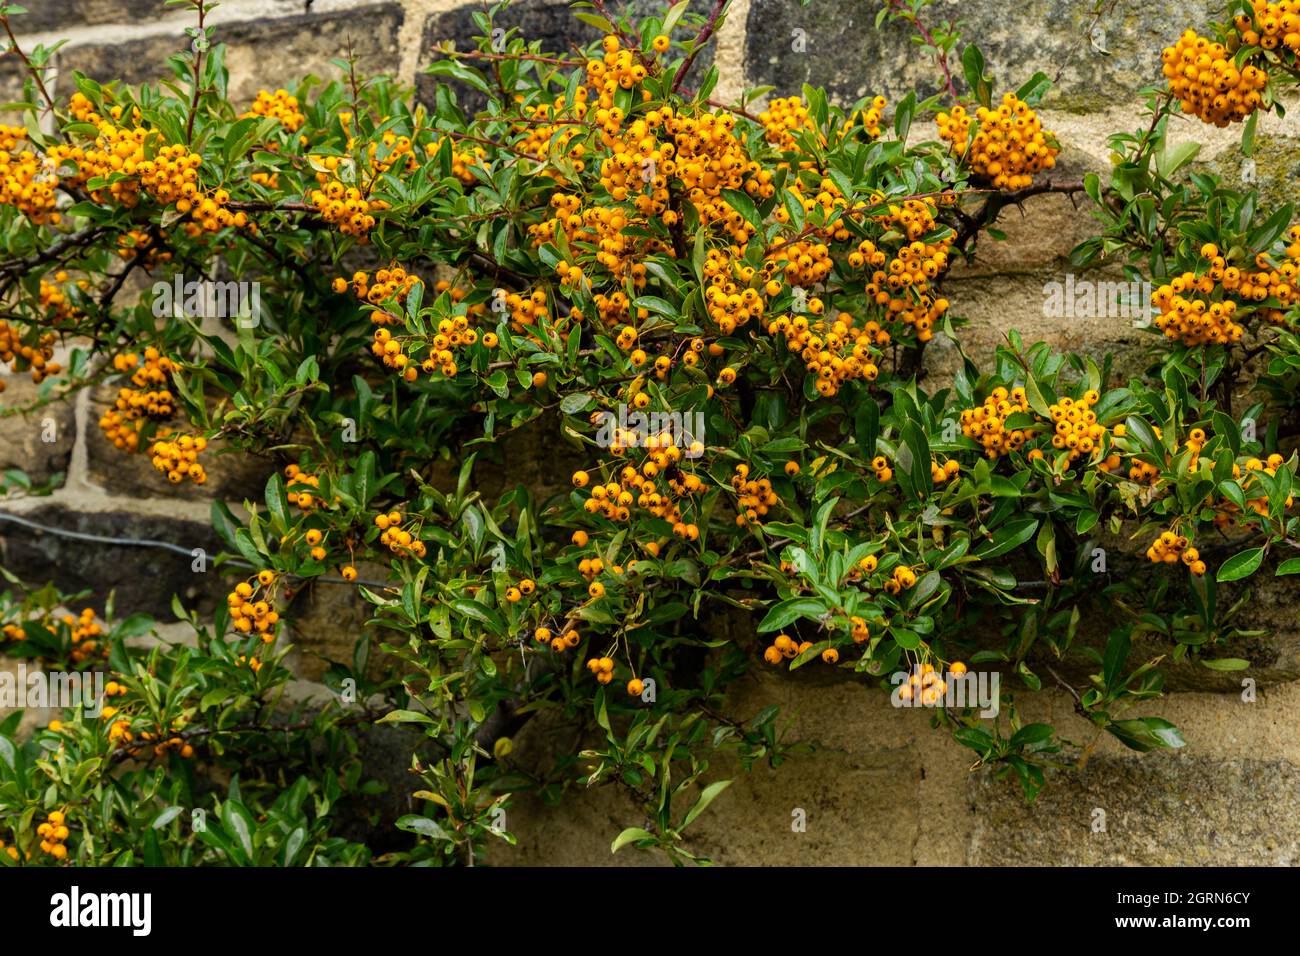 A pyracantha full of orange berries growing up a brick wall. Stock Photo